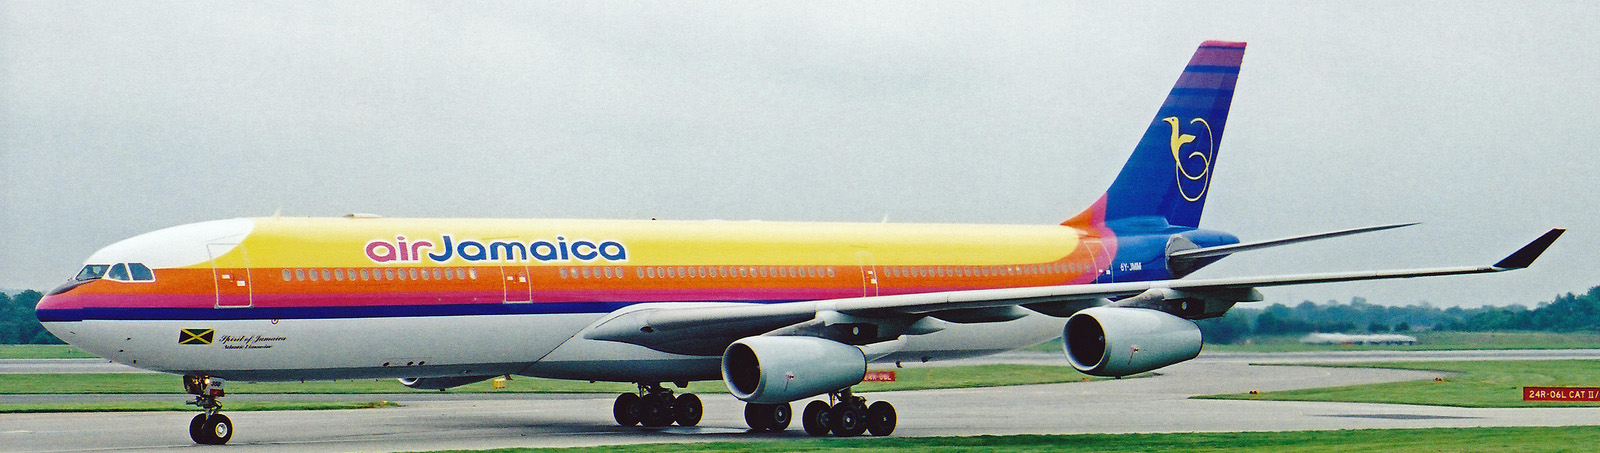 Air Jamaica Airbus A340-300 in last generation livery. Photo by Ken Fielding.